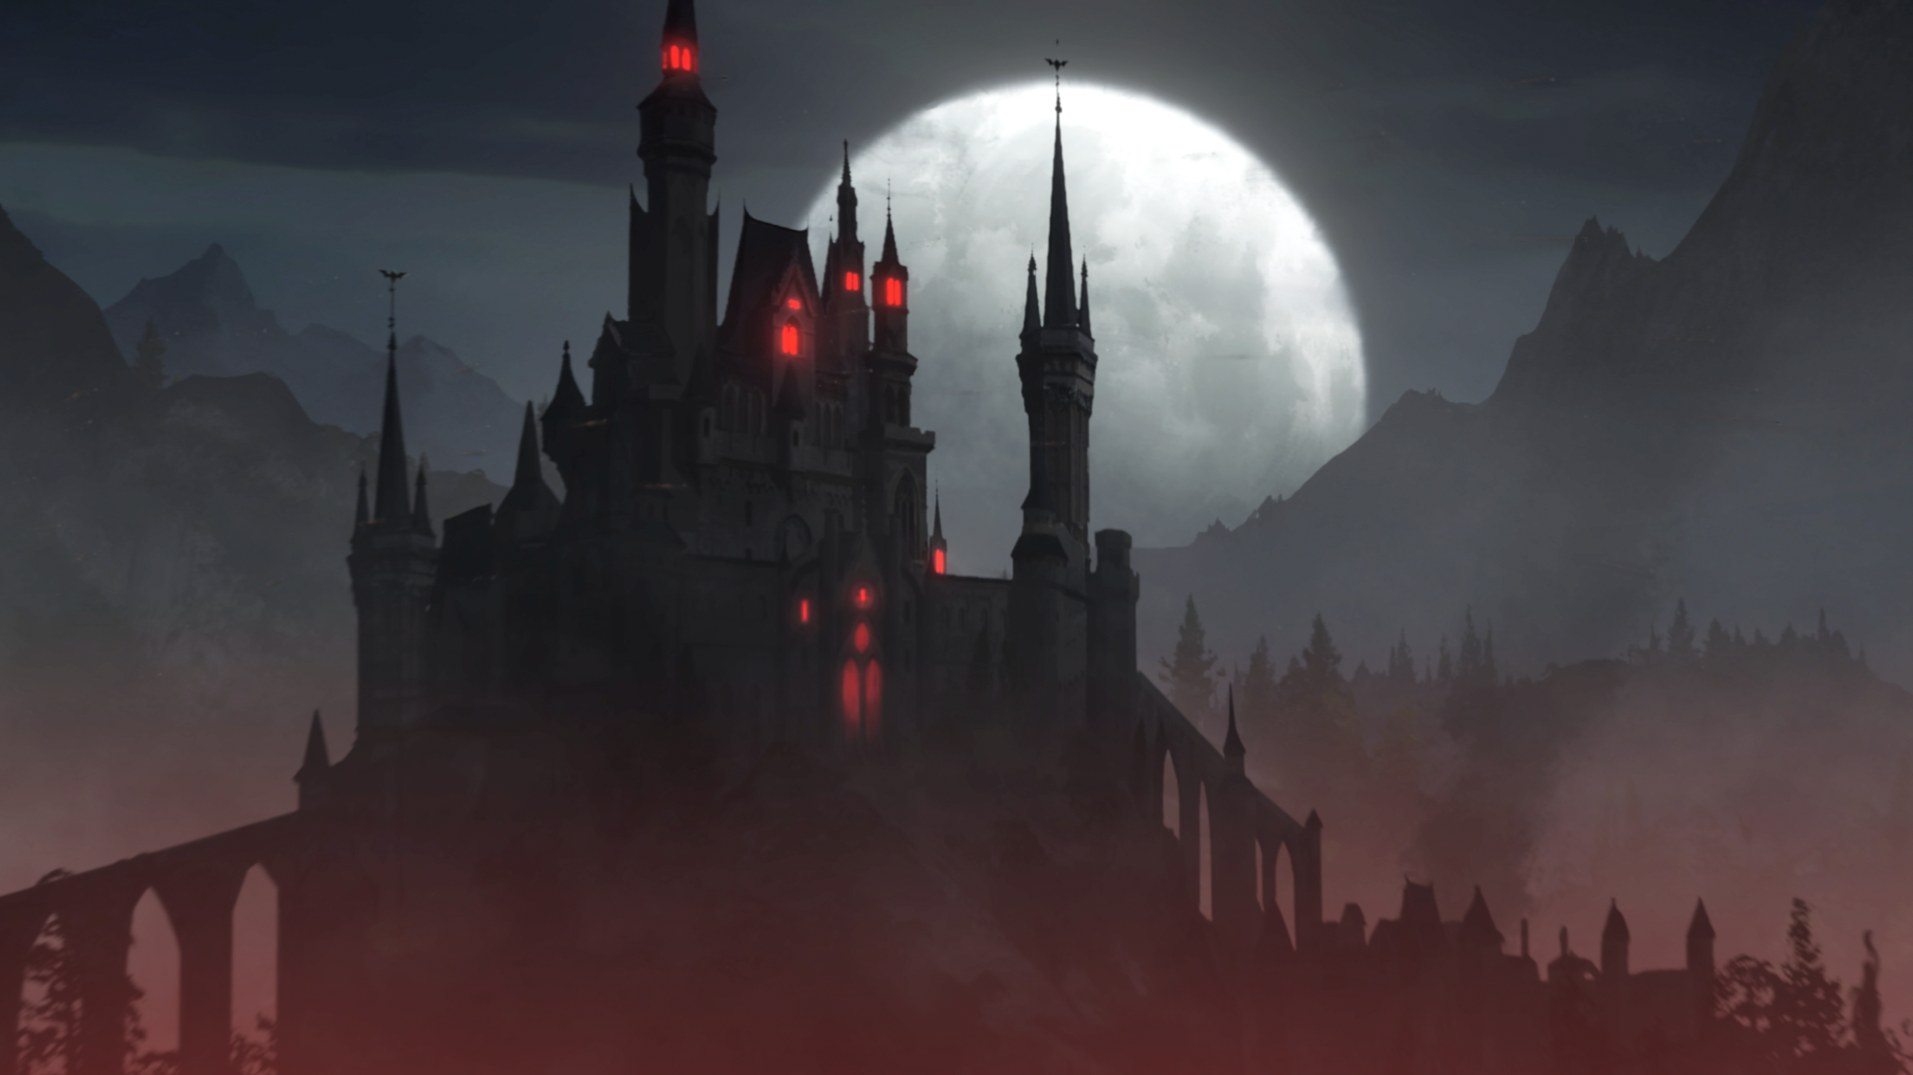 V Rising, a dark castle sits in front of a large full moon at night and it has glowing red windows